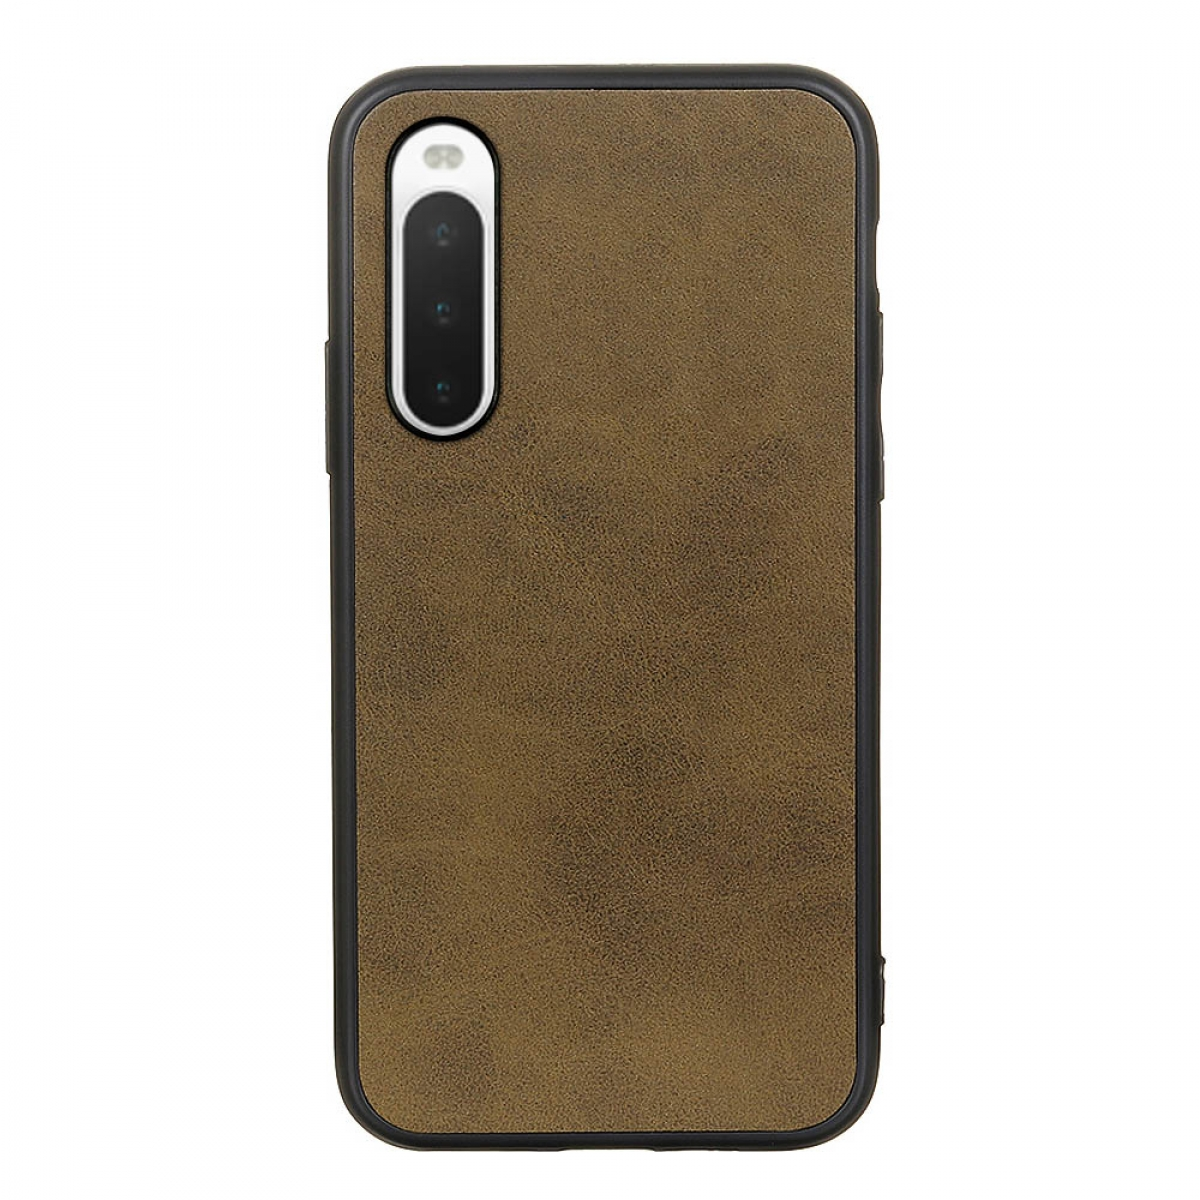 IV, Backcover, 10 Xperia Olive CASEONLINE Sony, CA-SE22,